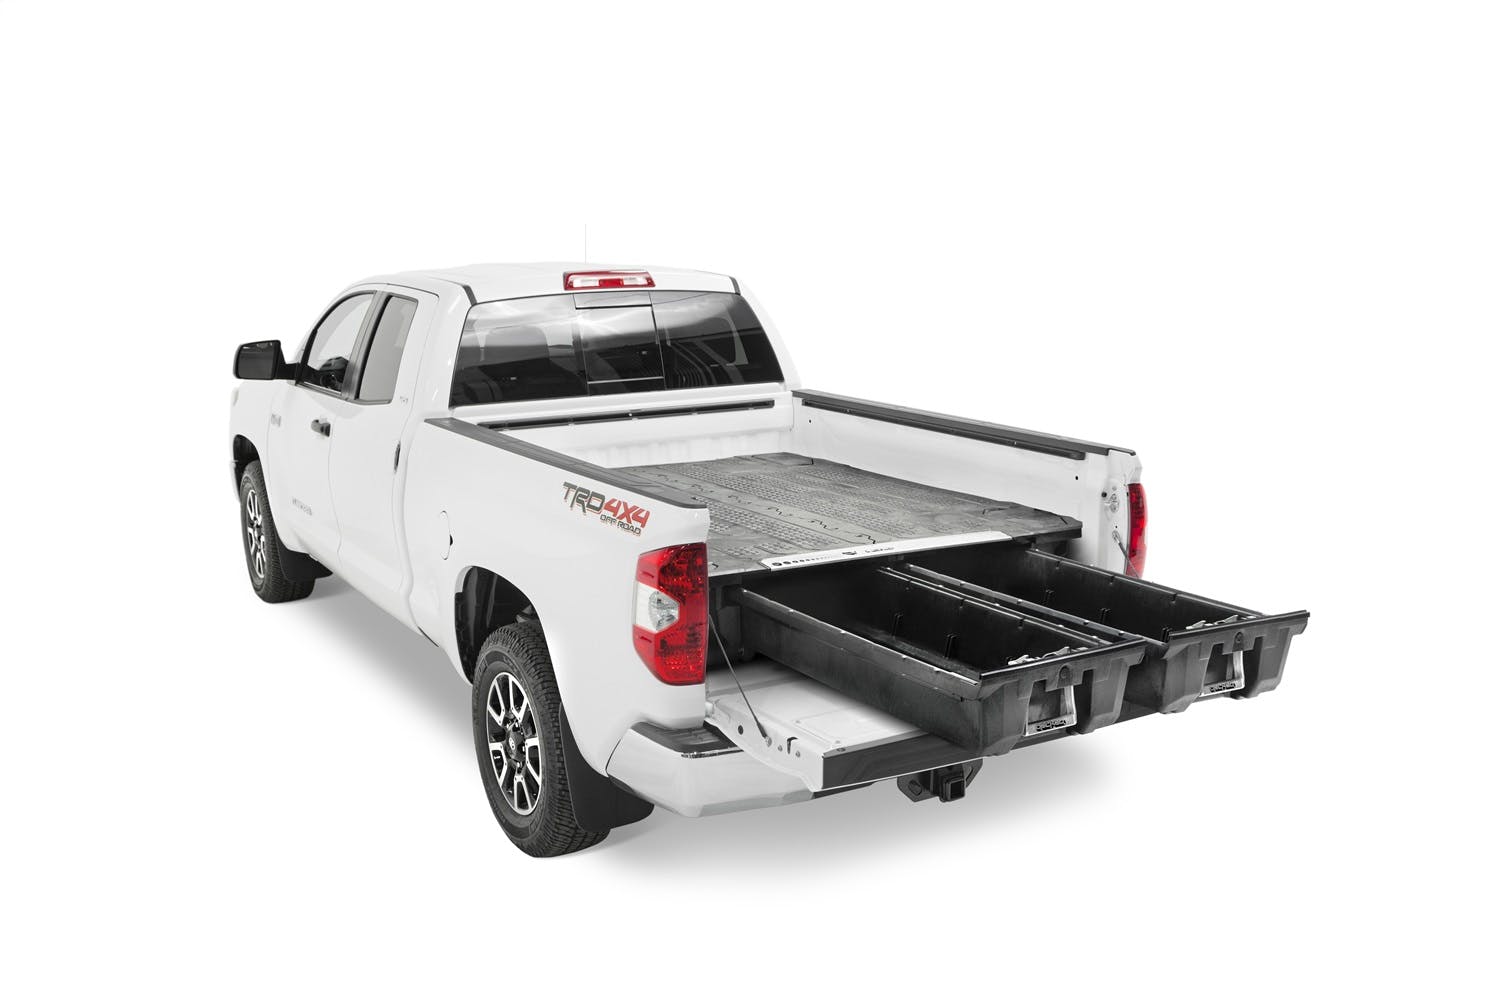 DECKED DT1 64.54 Two Drawer Storage System for A Full Size Pick Up Truck